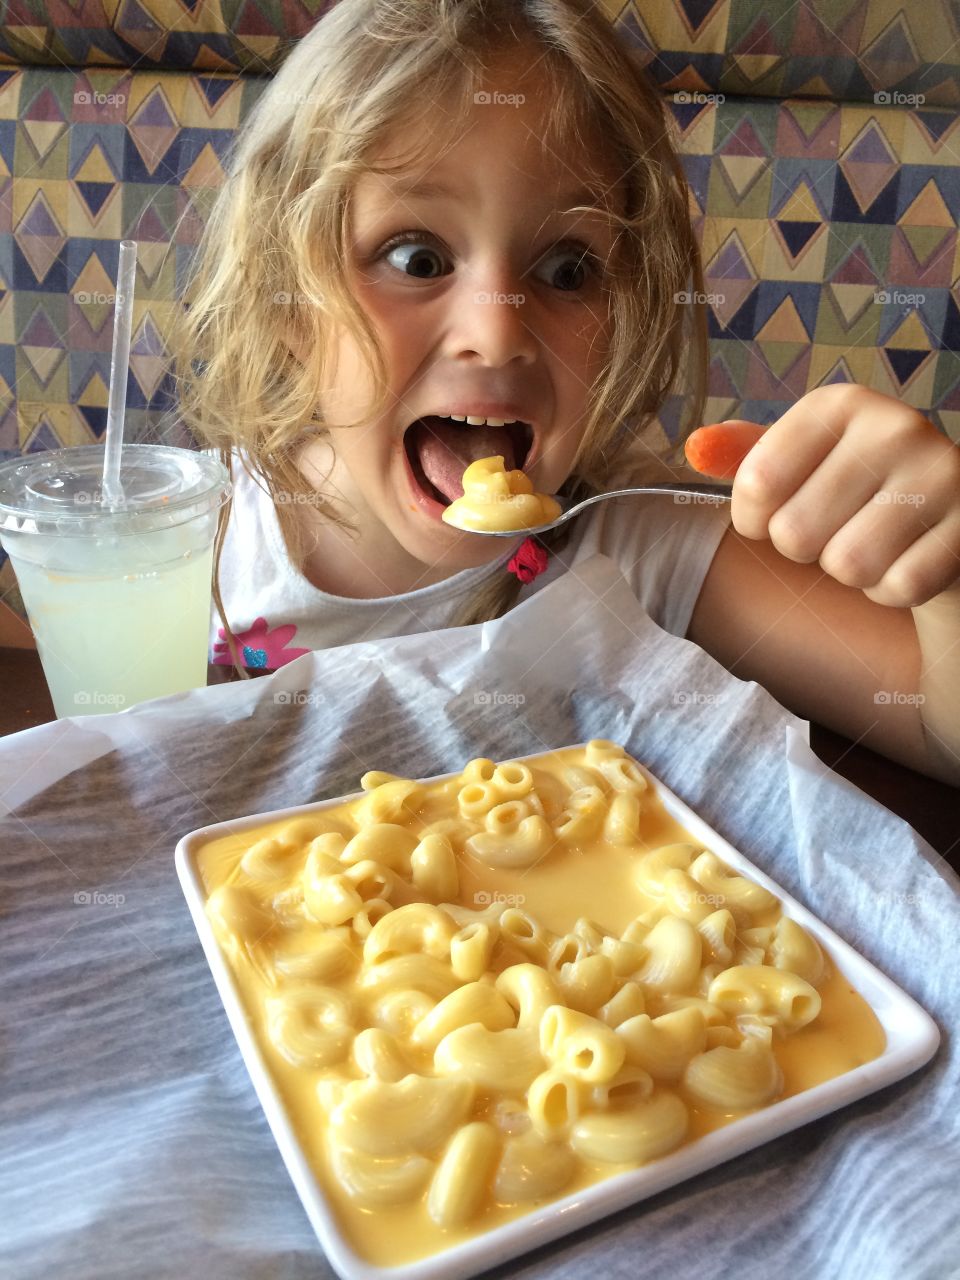 Hangry for some Mac n’ cheese 